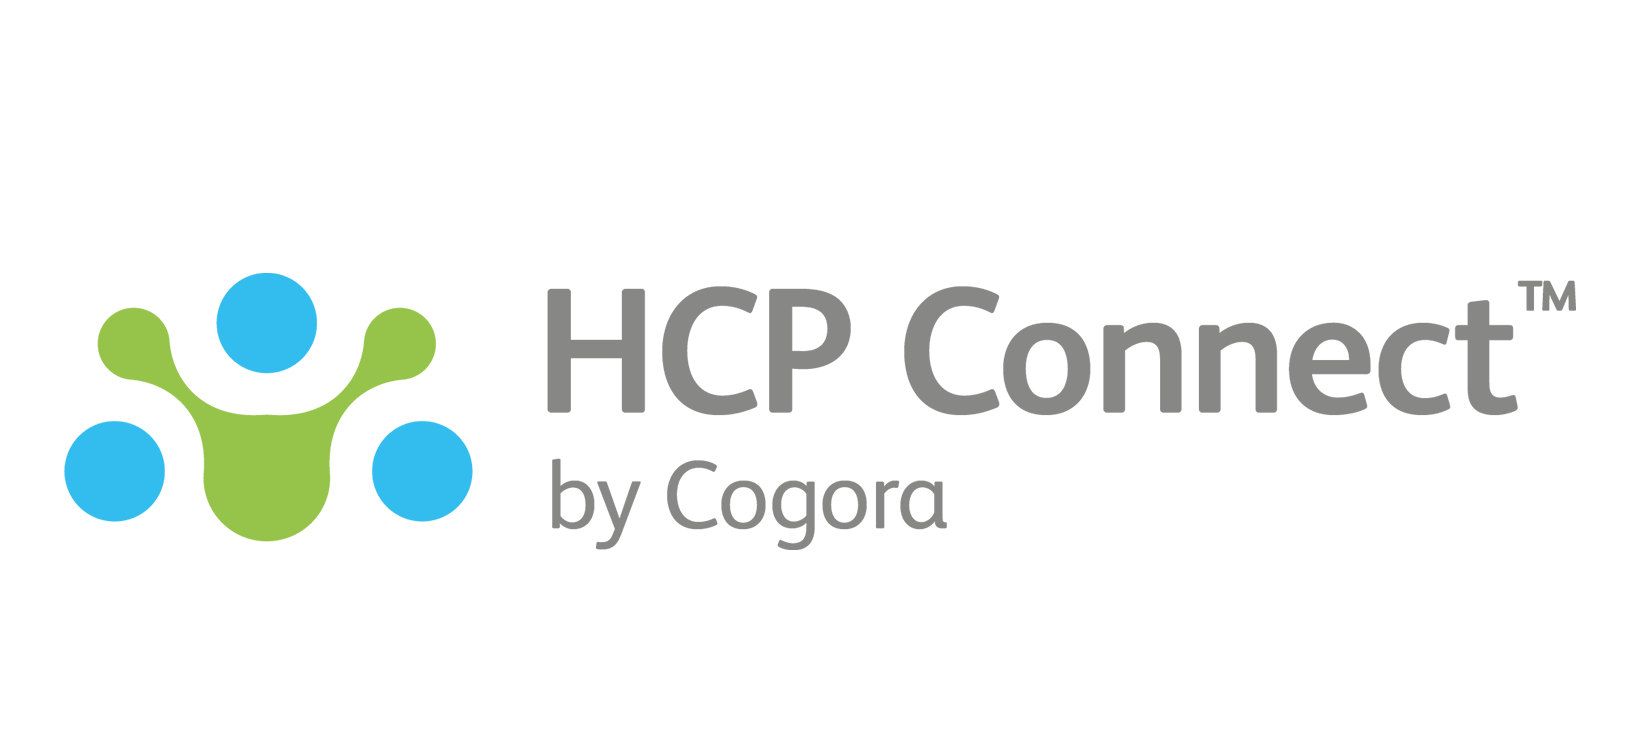 Launch of HCP Connect